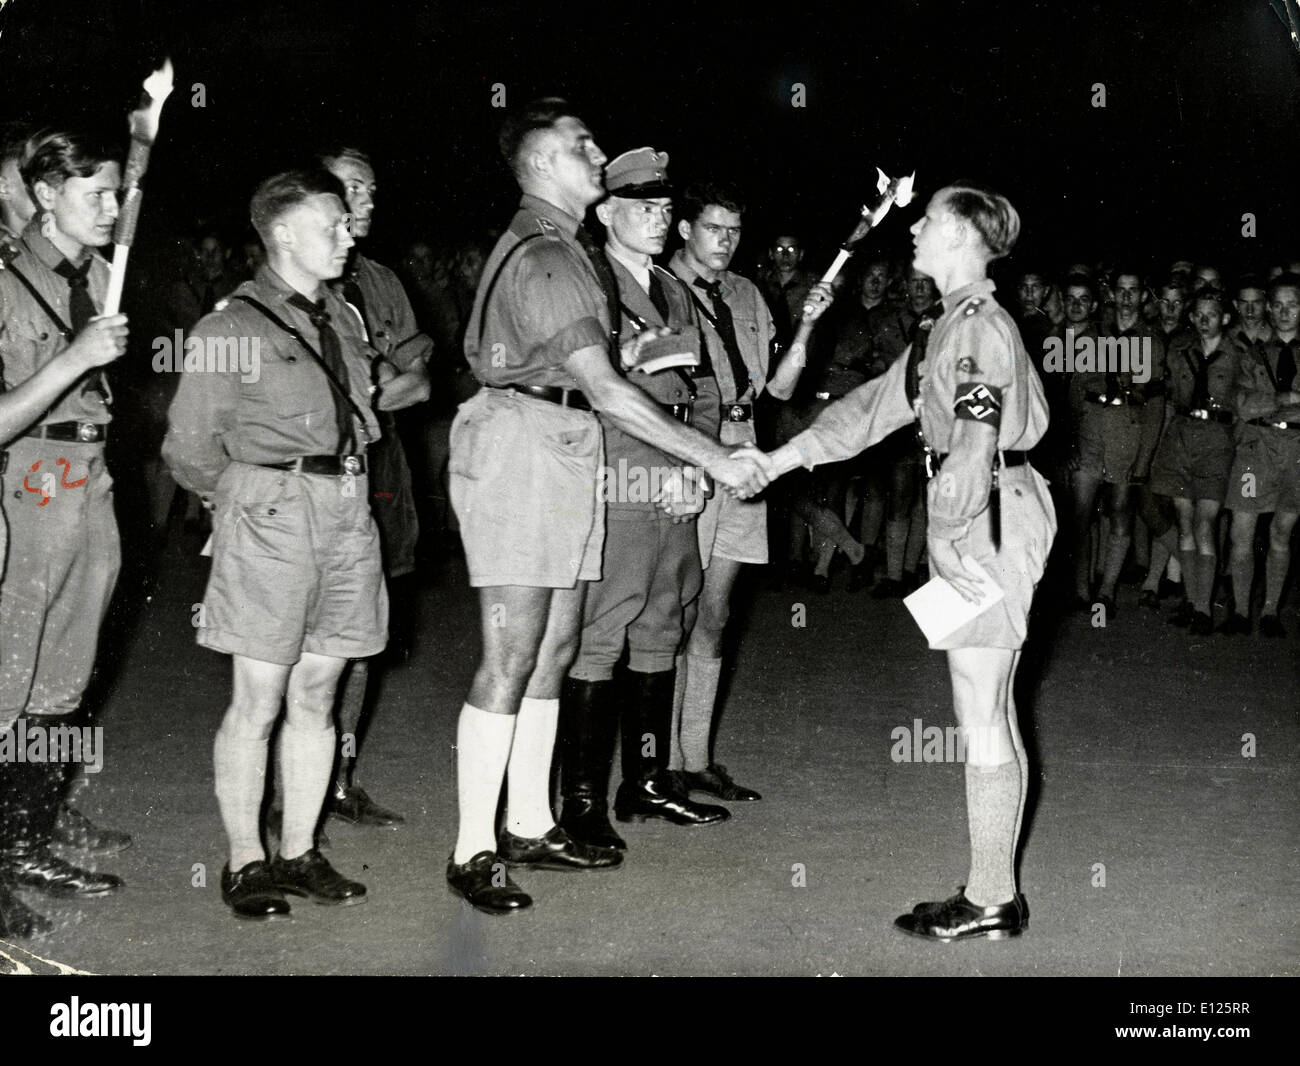 Jan 24, 2005; Berlin, GERMANY; (File Photo. Date Unknown) The Hitler Youth..  .com Stock Photo